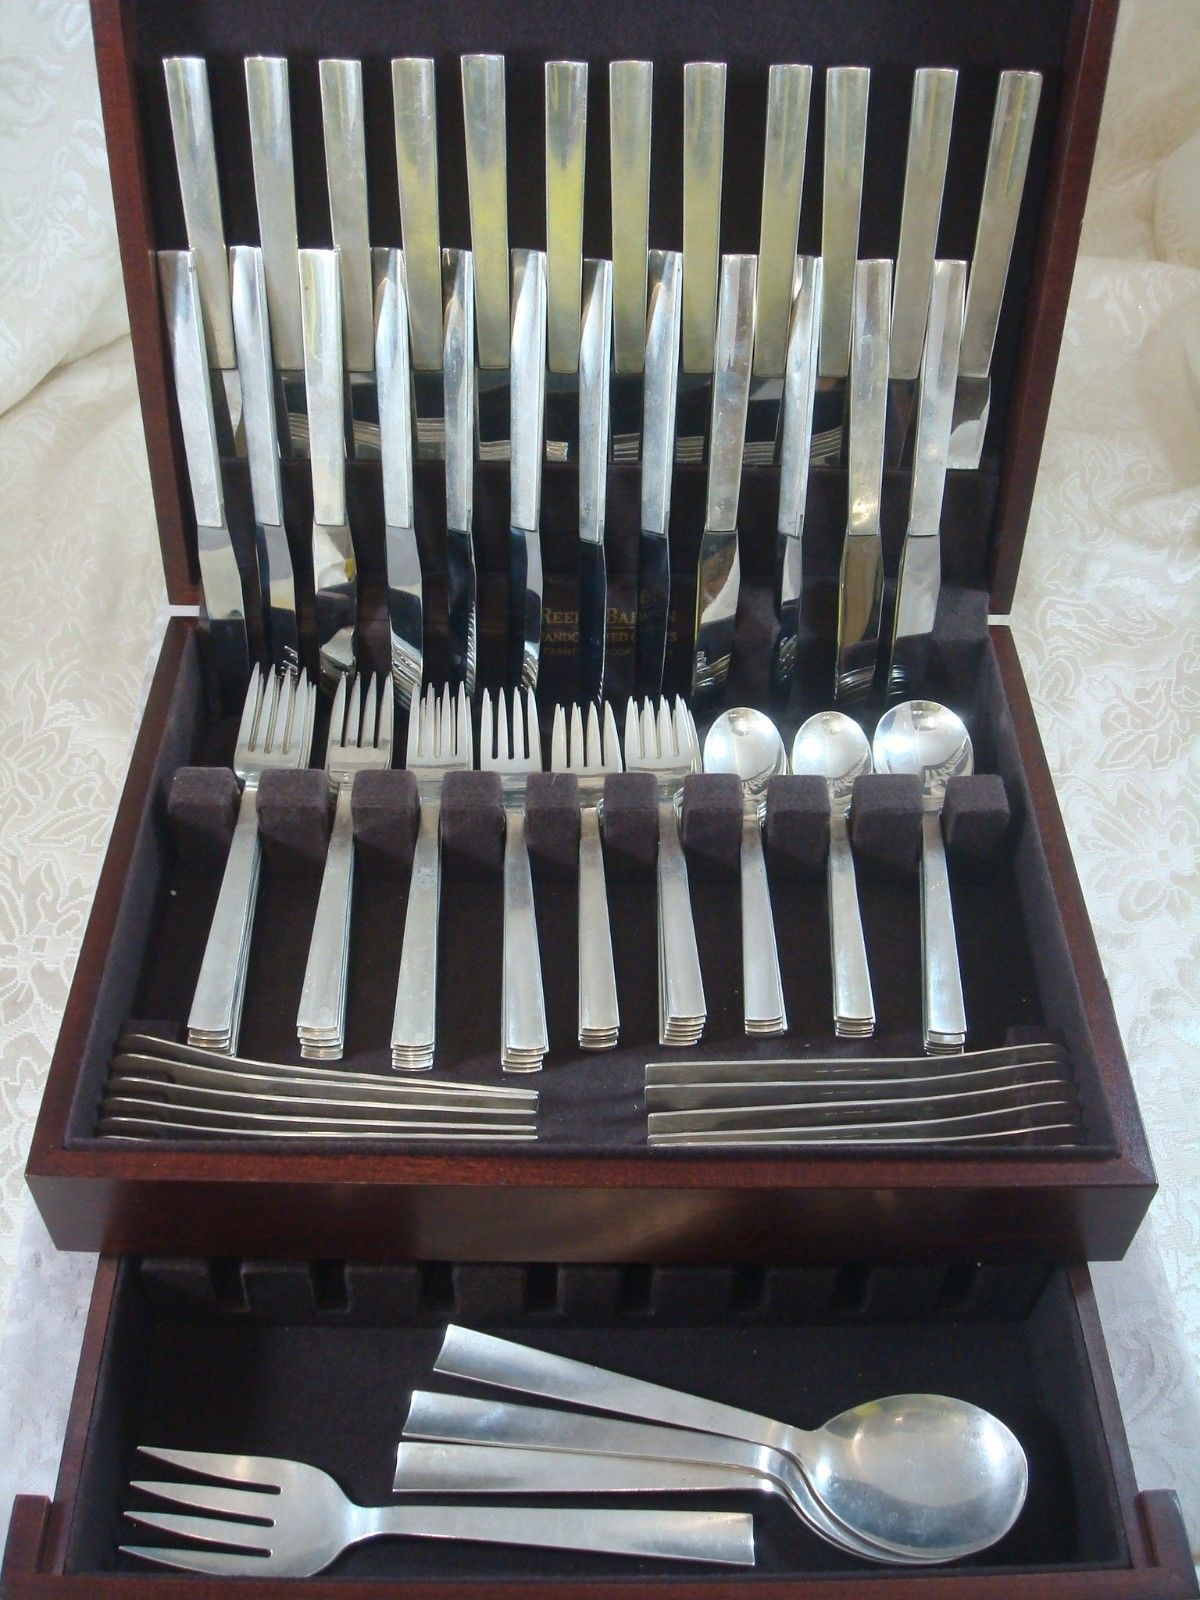 Harry Osaki (Pasadena, CA, circa 1960s) trained with Allan Adler and learned the trade of creating fine hand-wrought silver from Porter Blanchard. He made some of the finest hand-wrought silver of all time. Osaki silver flatware is quite scarce. The